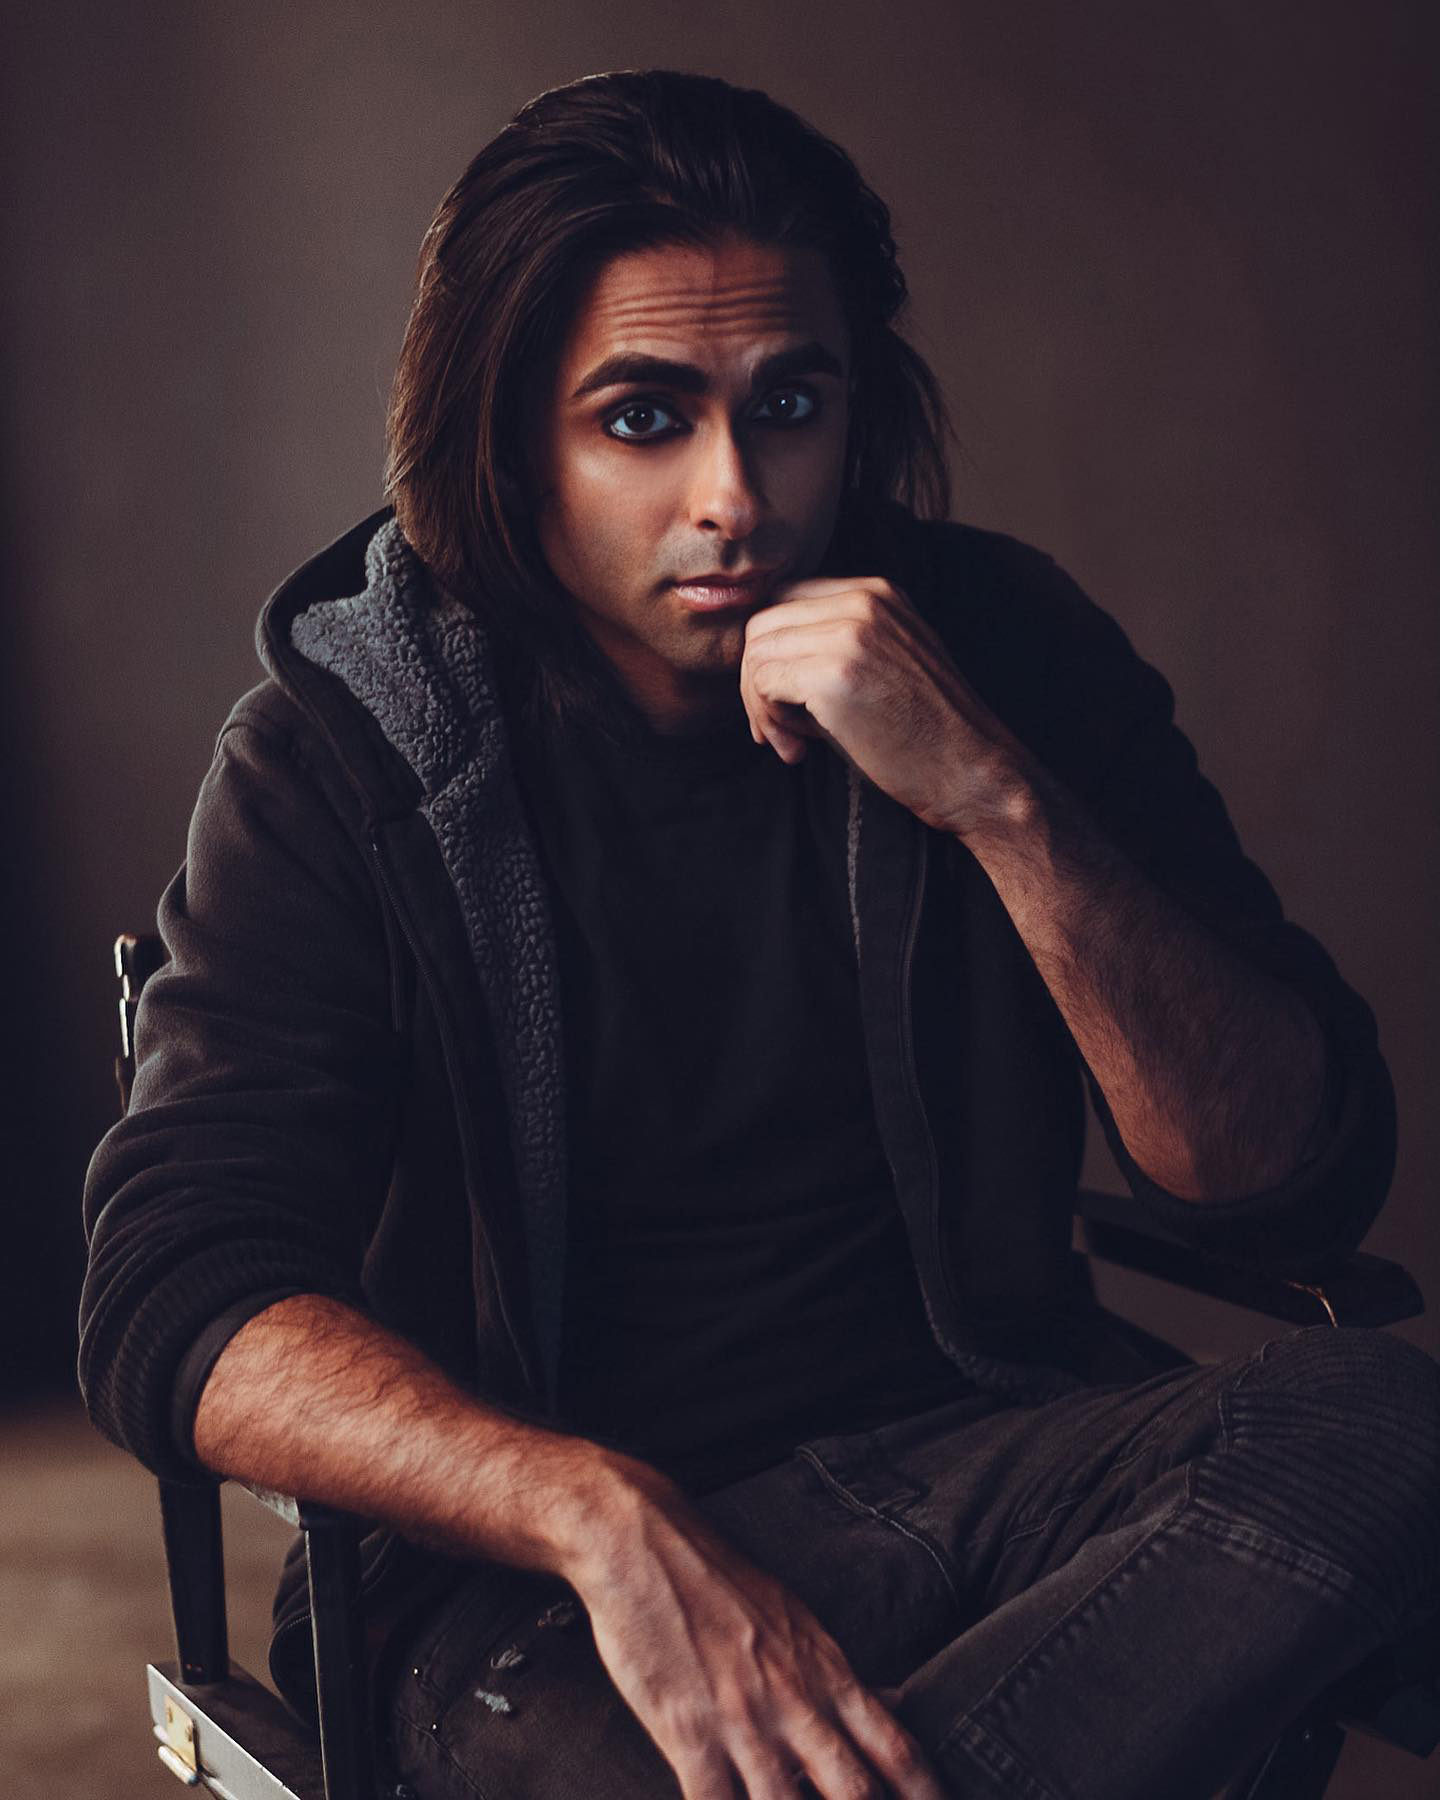 Adi Shankar continues to push himself to his creative limits. - Photo by Dexter Brown